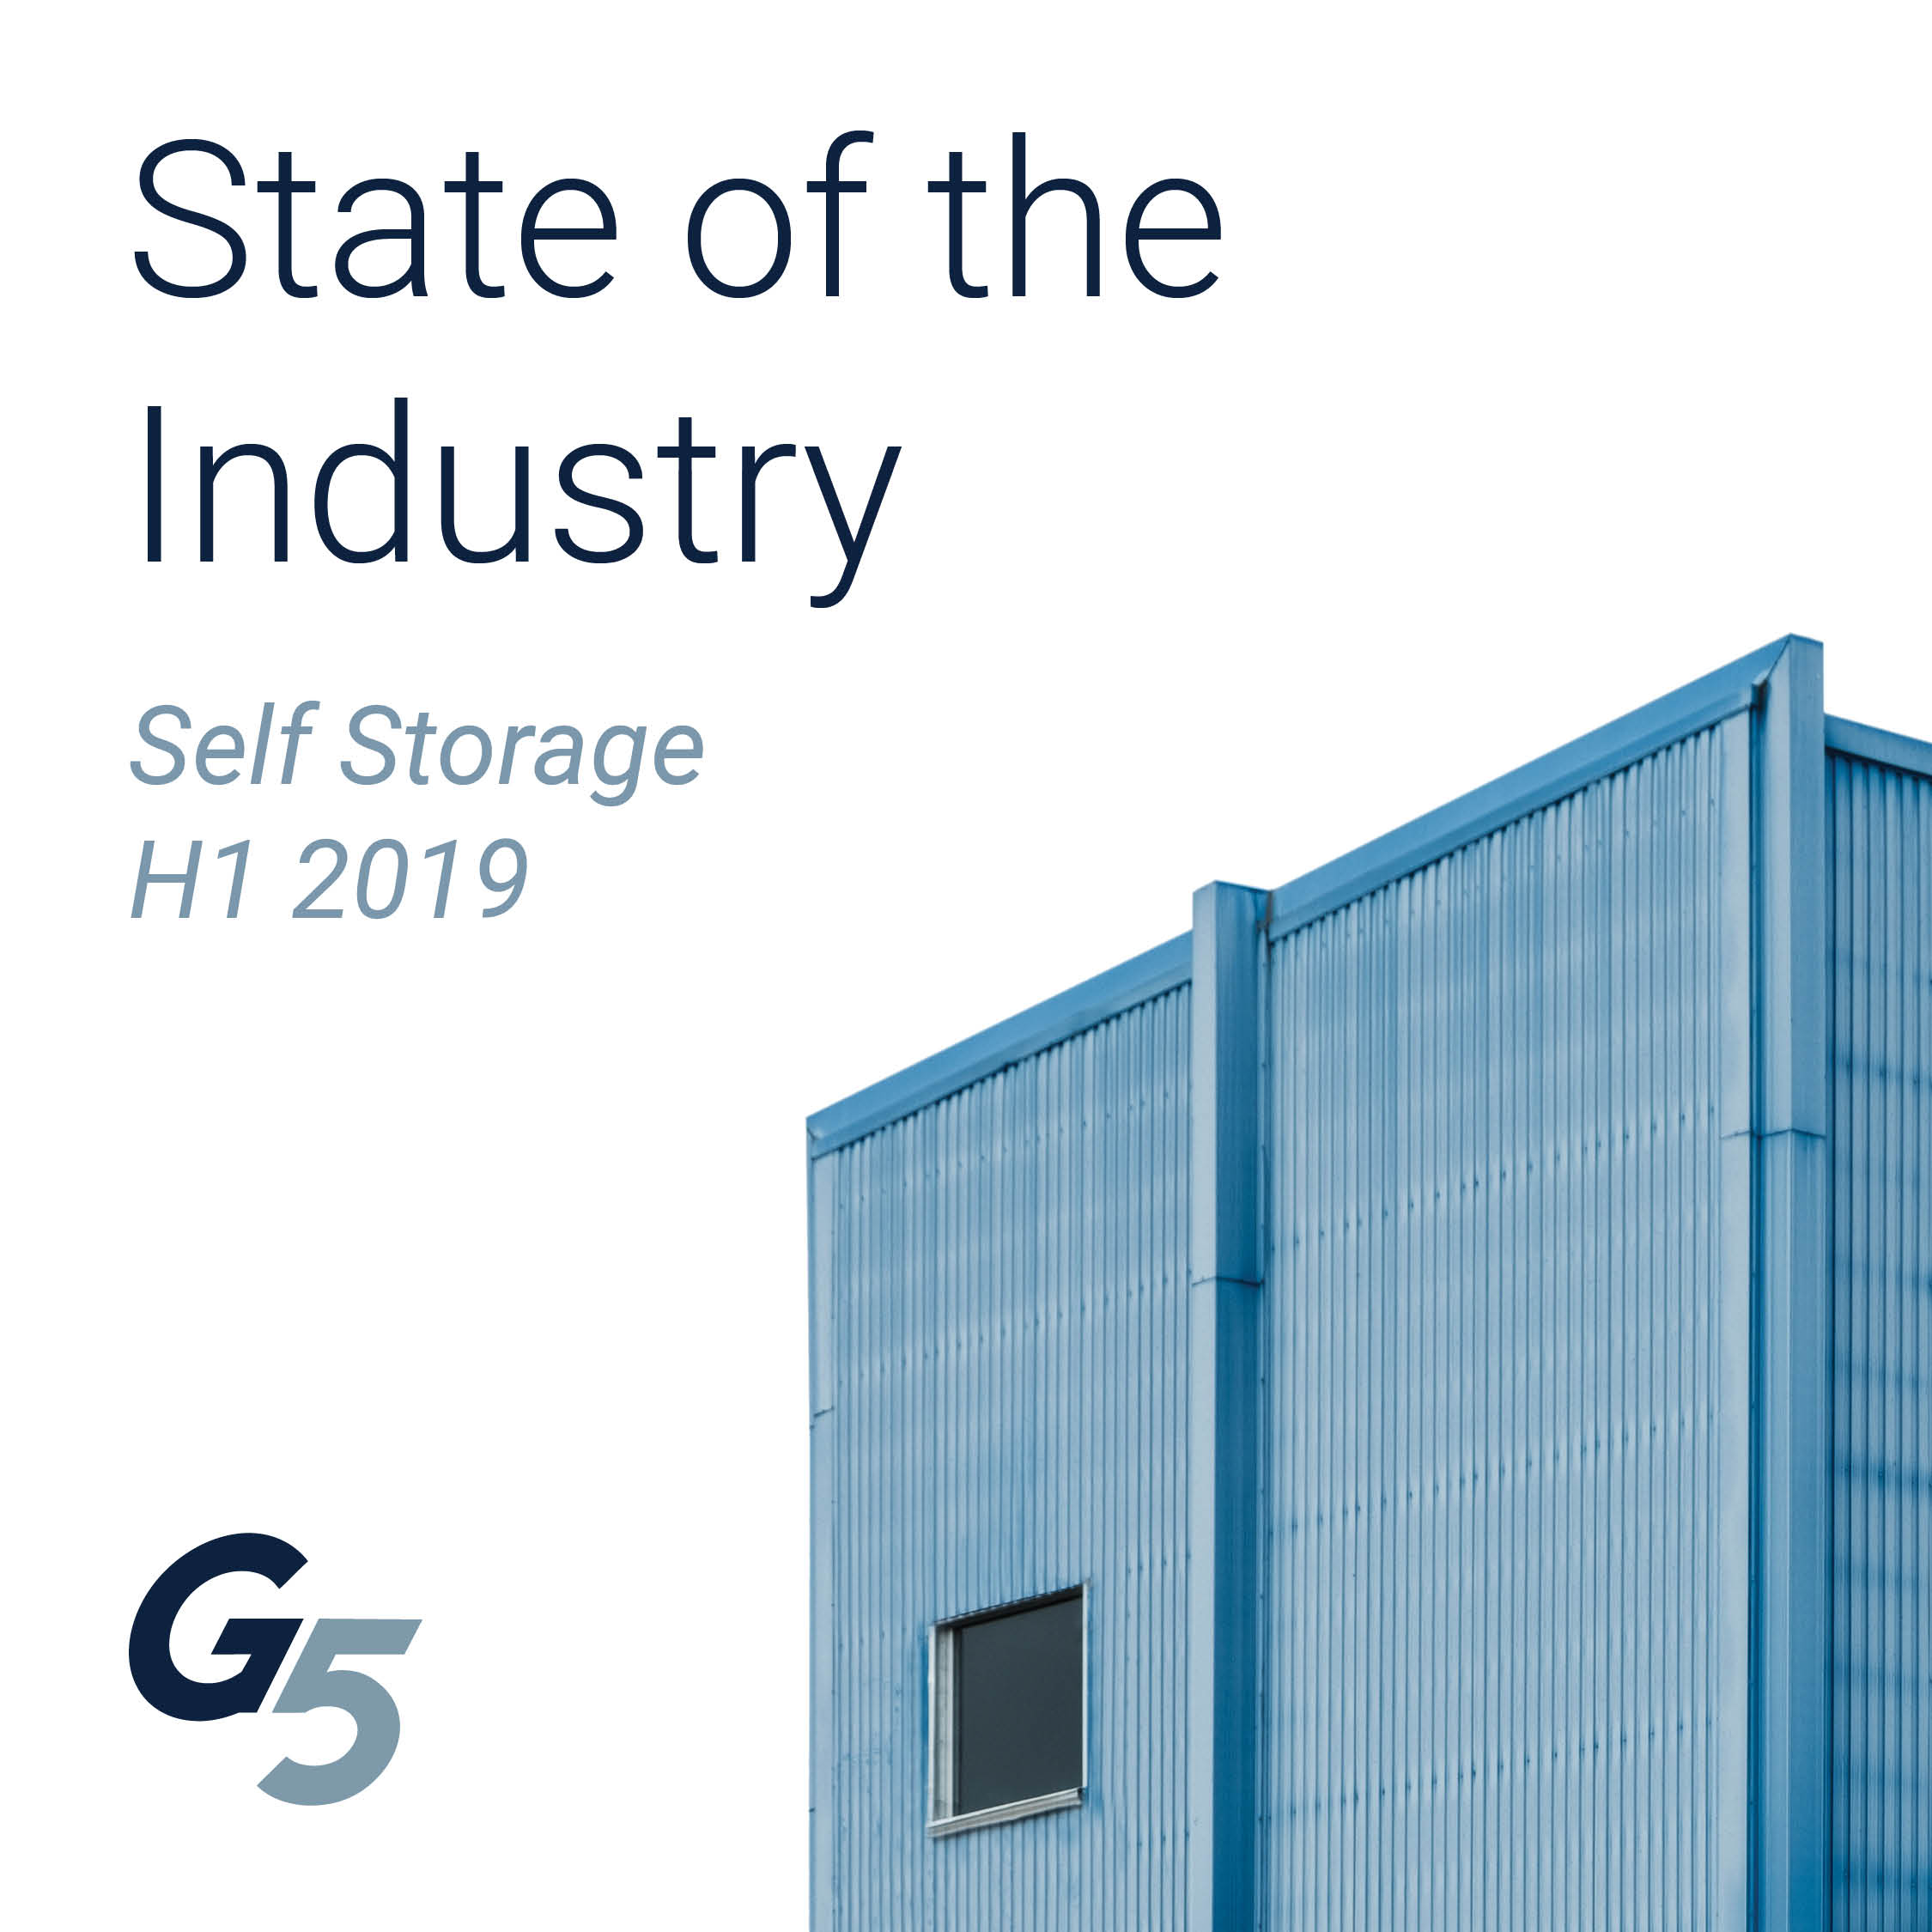 Self Storage State of the Industry G5